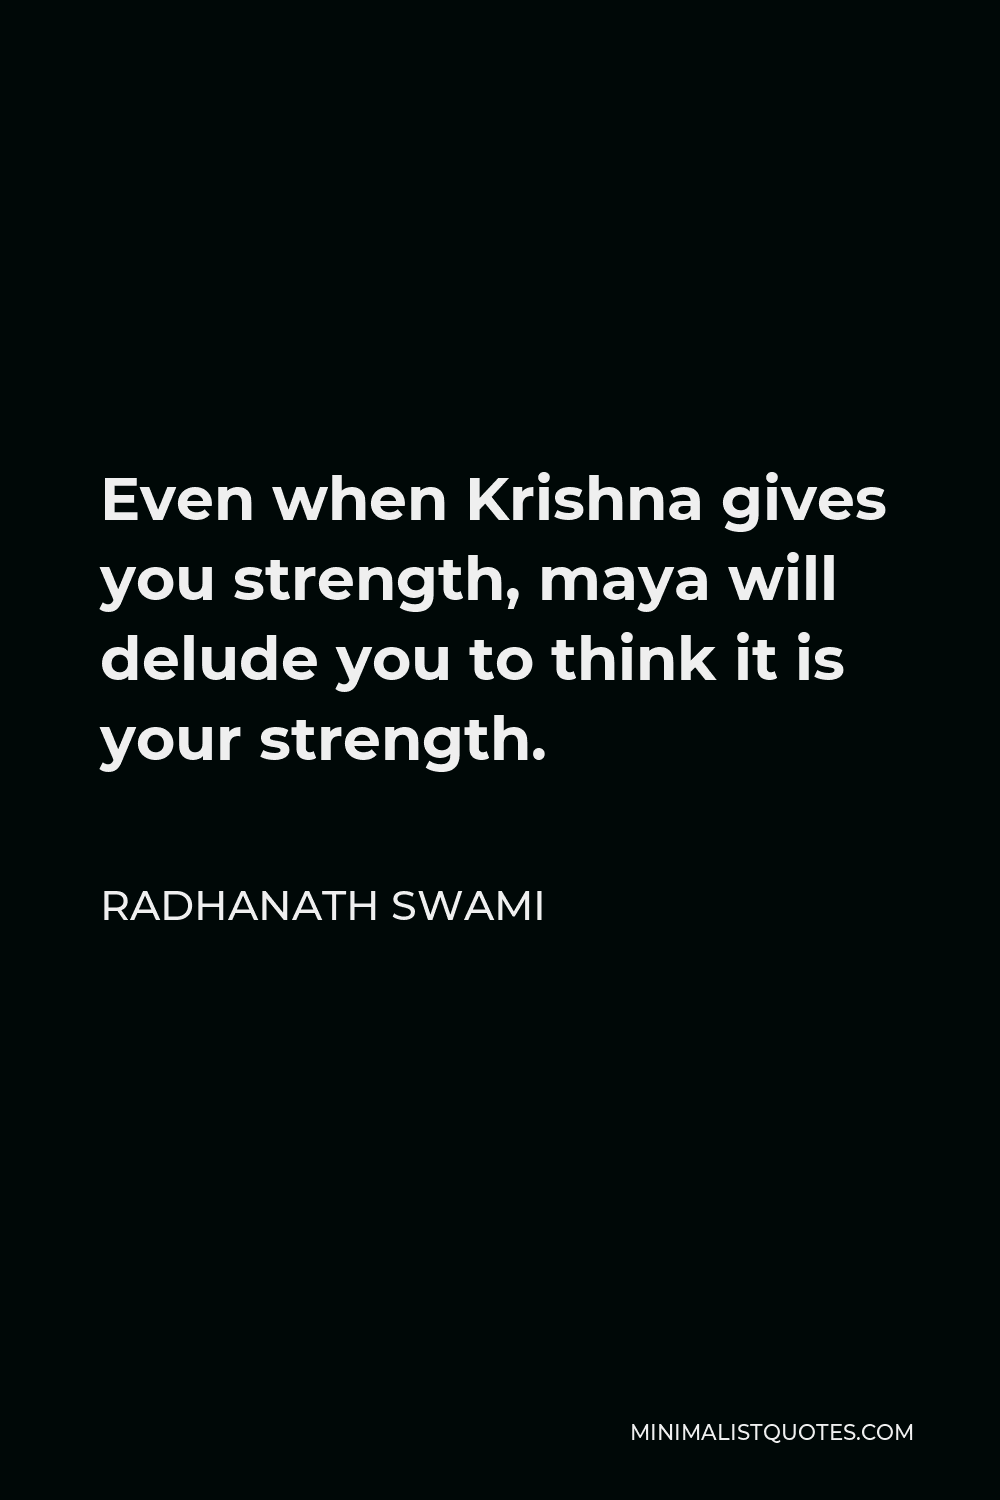 Radhanath Swami Quote - Even when Krishna gives you strength, maya will delude you to think it is your strength.